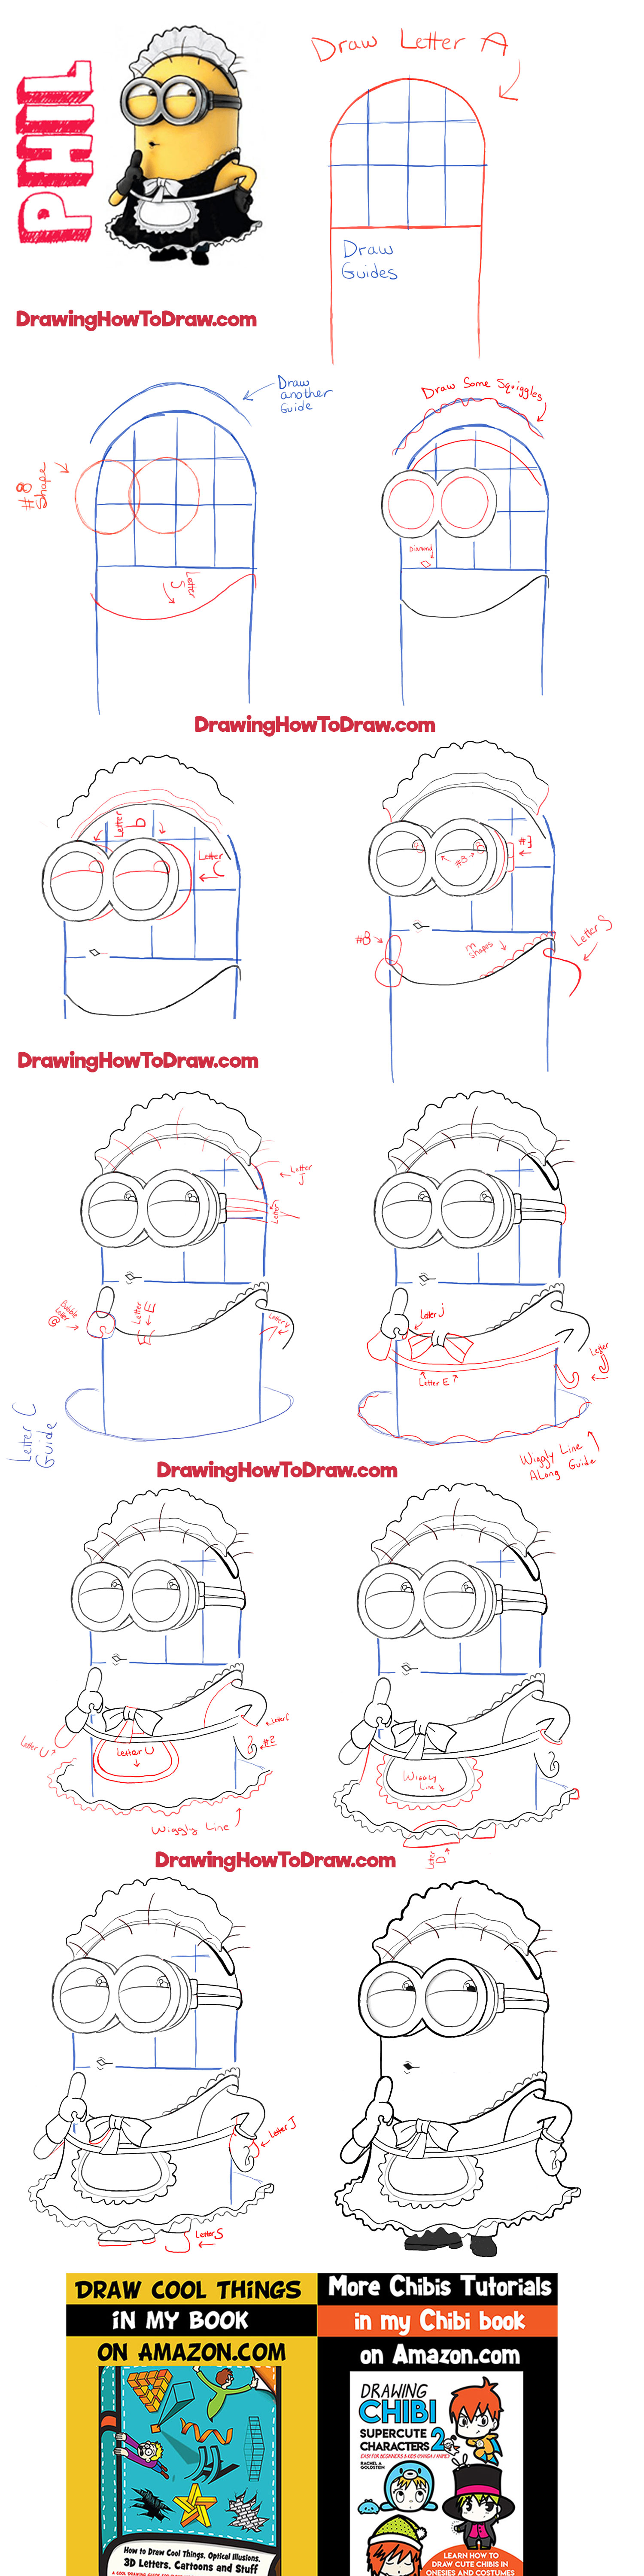 How to Draw Phil the Minion Dressed up as a Maid from Despicable Me 2 Step by Step